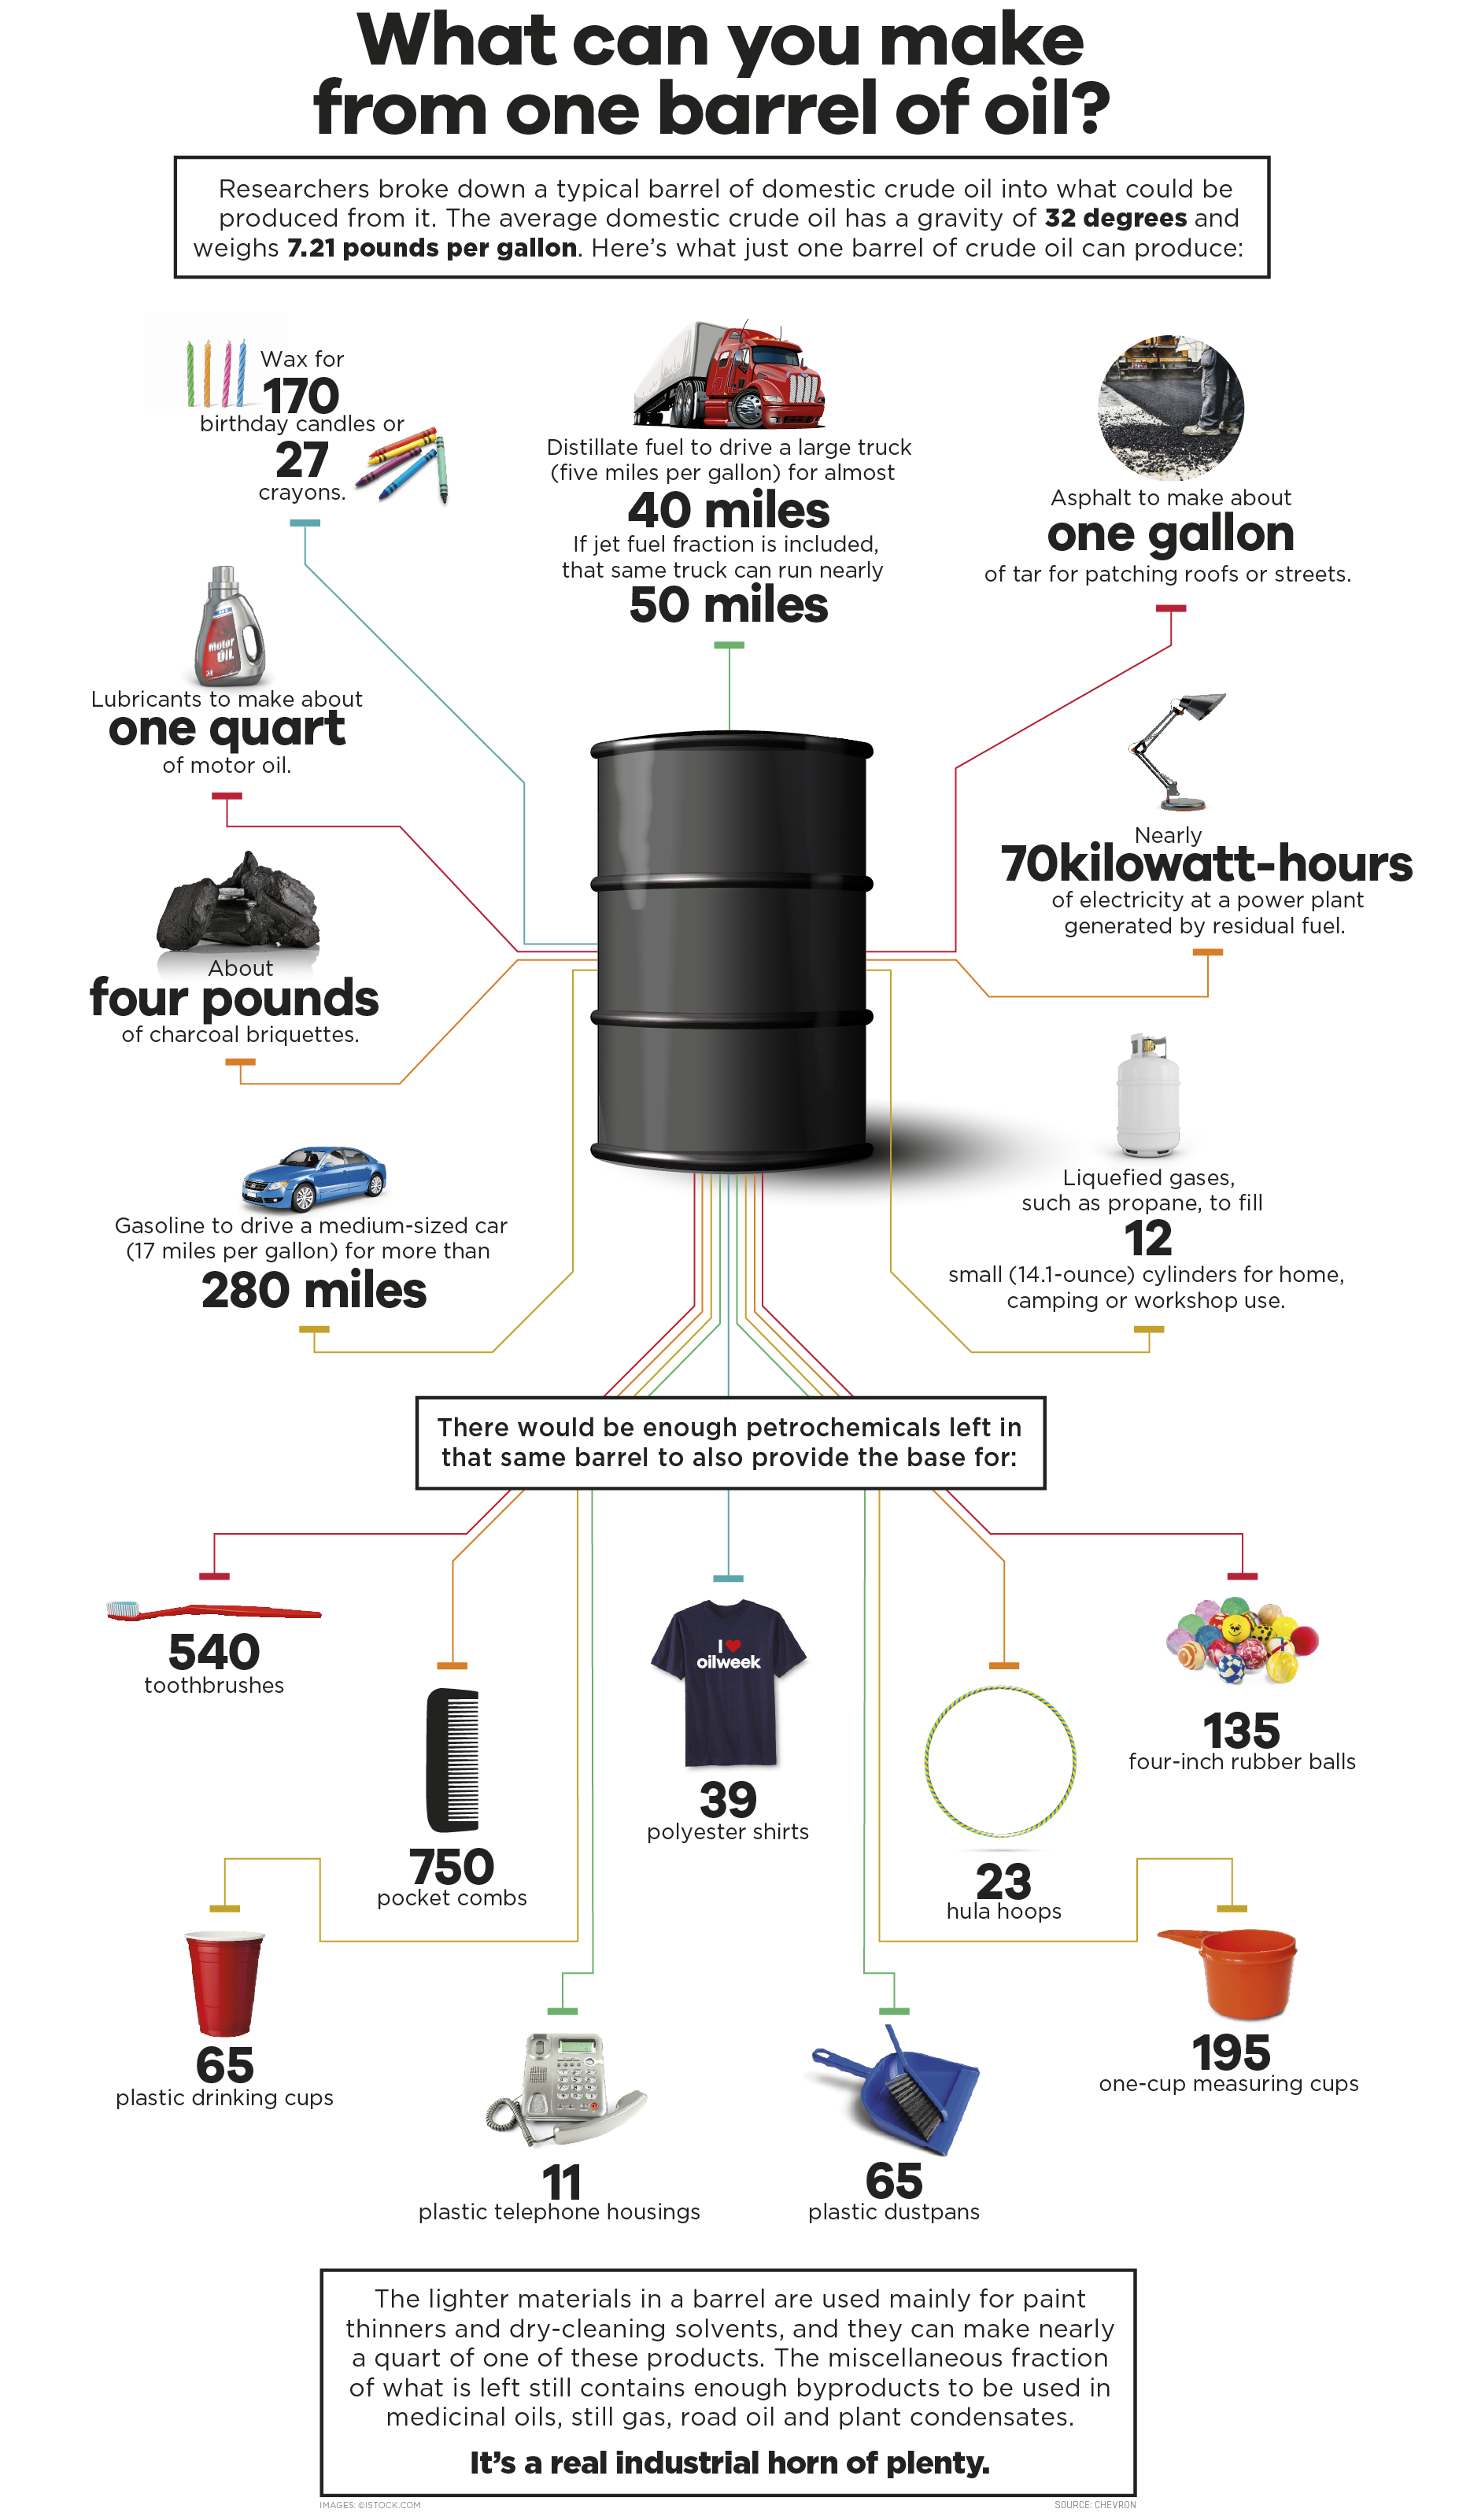 products made from crude oil